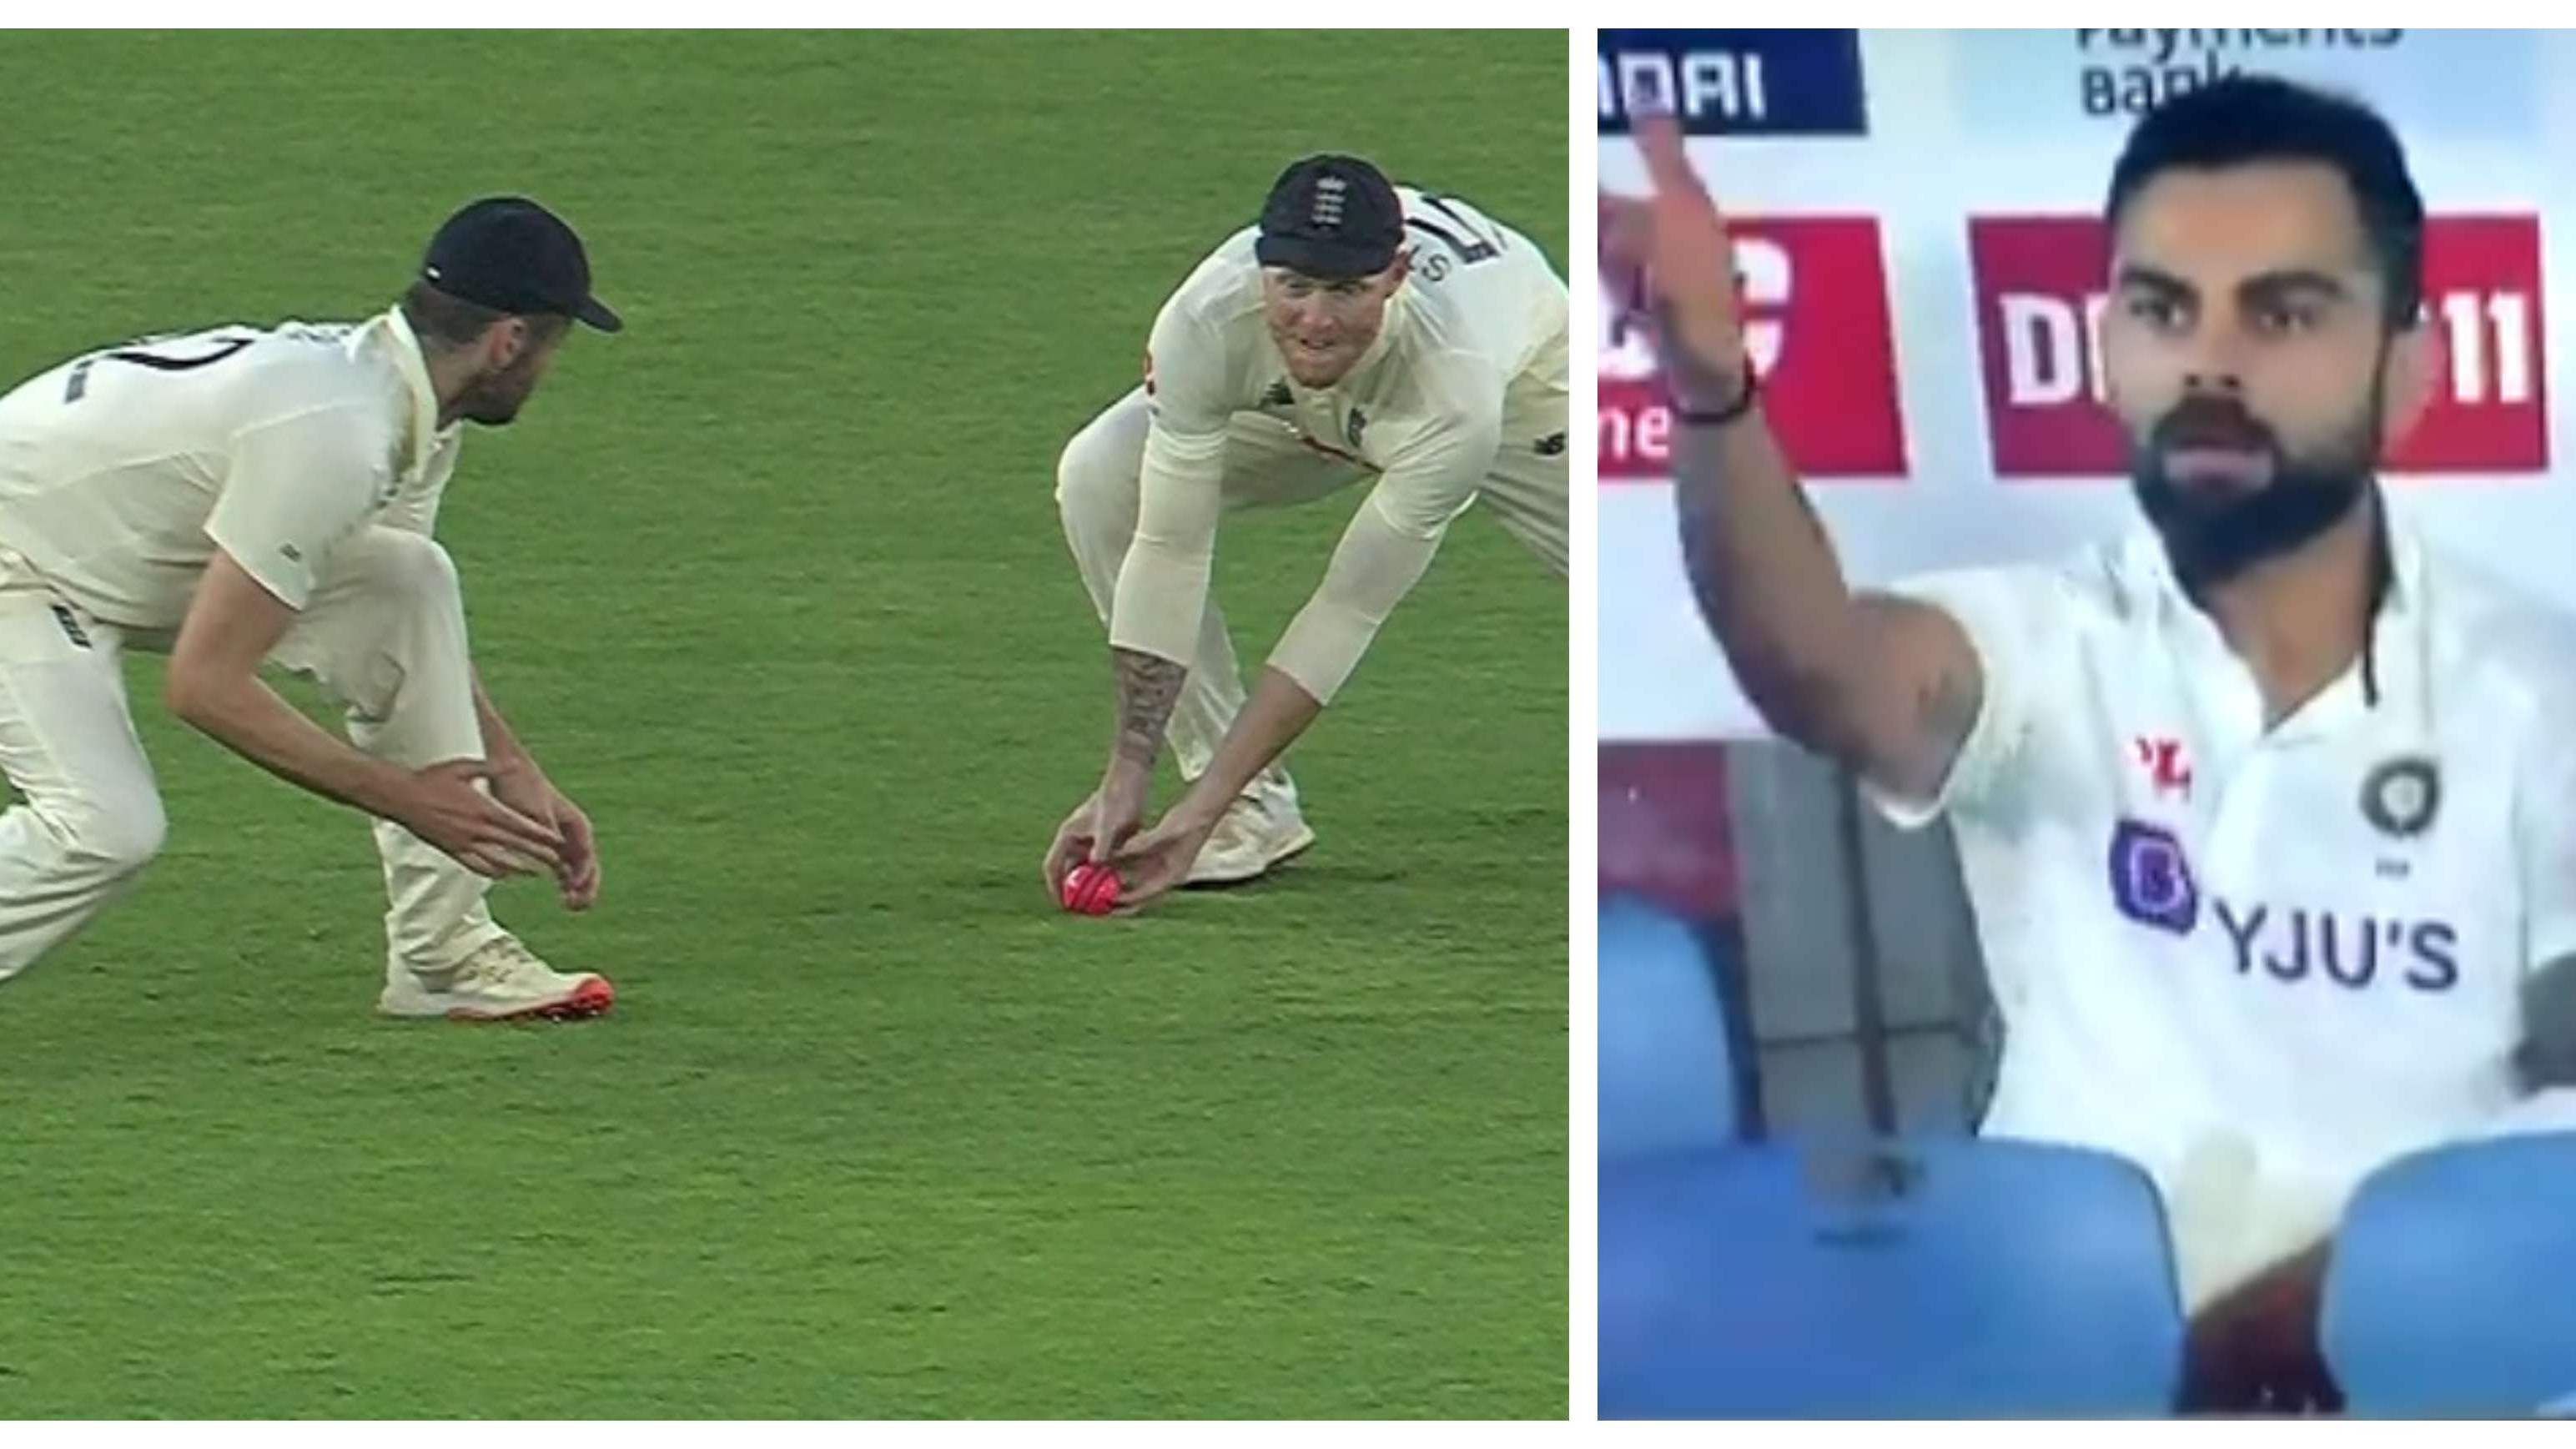 IND v ENG 2021: WATCH – England players argue with umpire after Gill gets declared not out, Kohli too reacts 